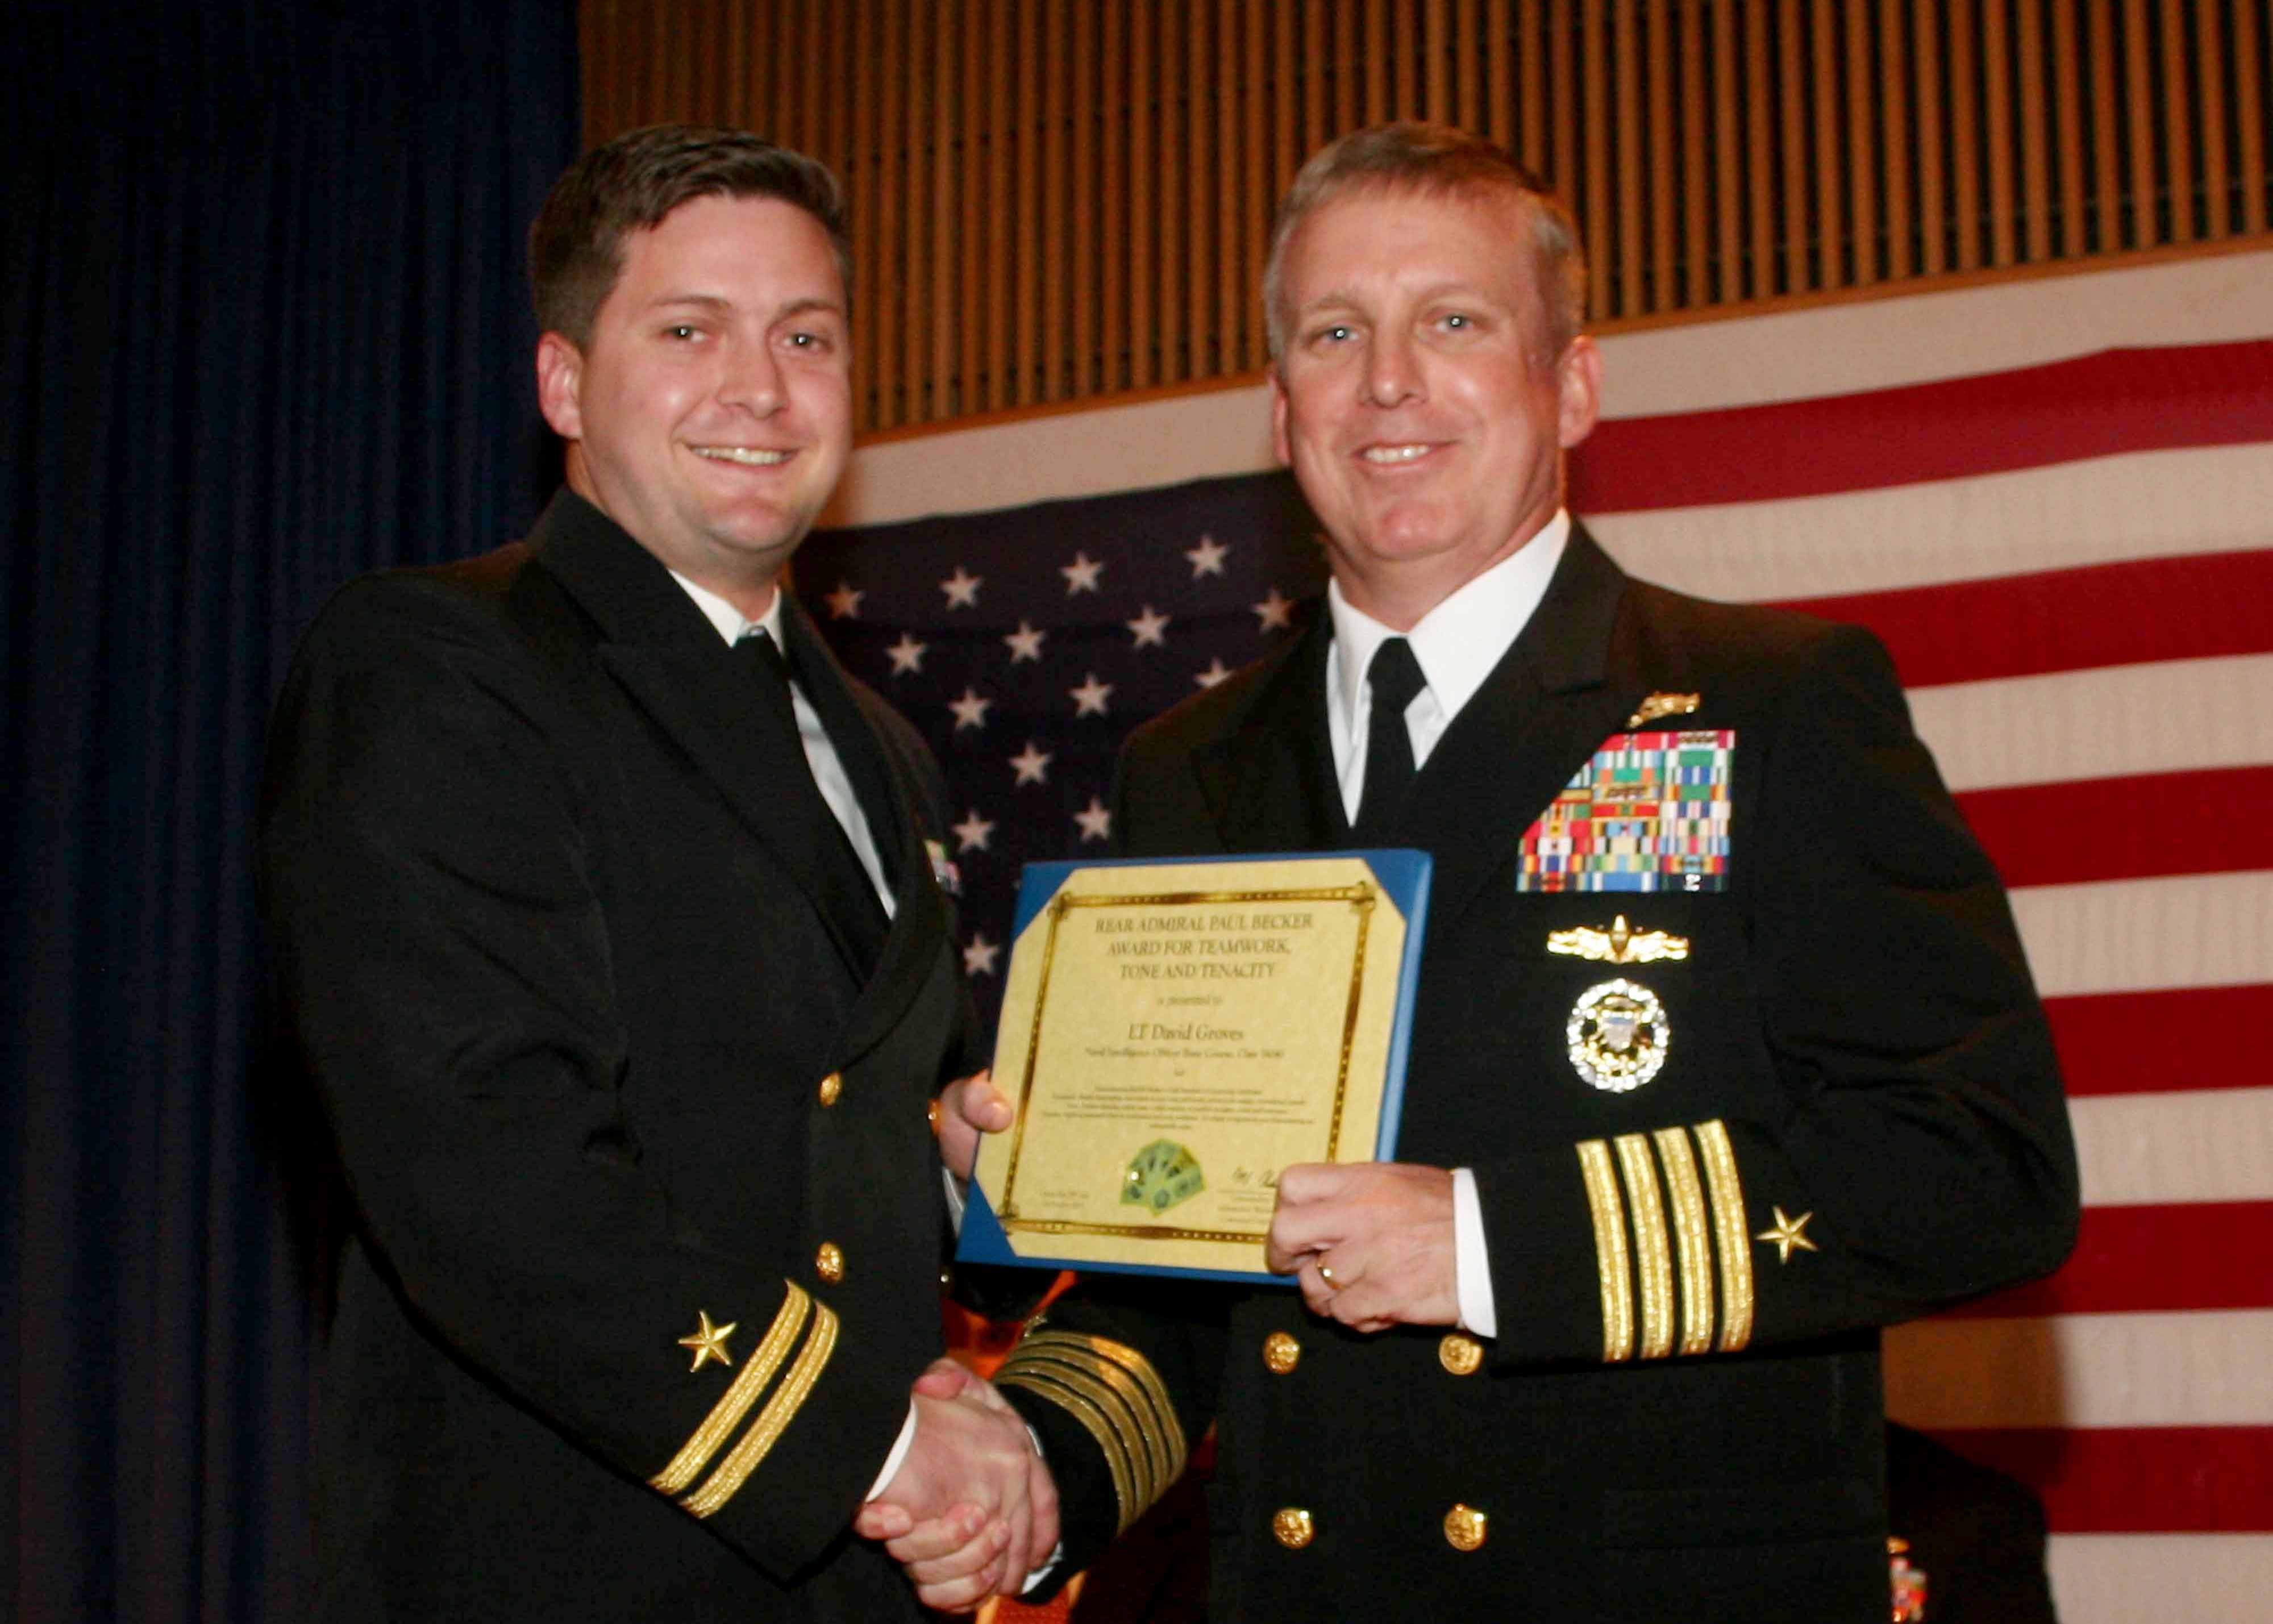 Lt. David Groves receives the Rear Adm. Paul Becker "Teamwork, Tone, Tenacity" award from Capt. Mark Kester during the Naval Intelligence Officer Basic Course (NIOBC) graduation at  Information Warfare Training Command (IWTC) Virginia Beach, Oct. 28, 2016.  The new award is named after Becker's decade's long emphasis on his pillars of leadership.  NIOBC has been taught at Layton Hall at the Dam Neck Annex since 1986 and graduates 121 students on average every year. Photo courtesy of U.S. Navy.